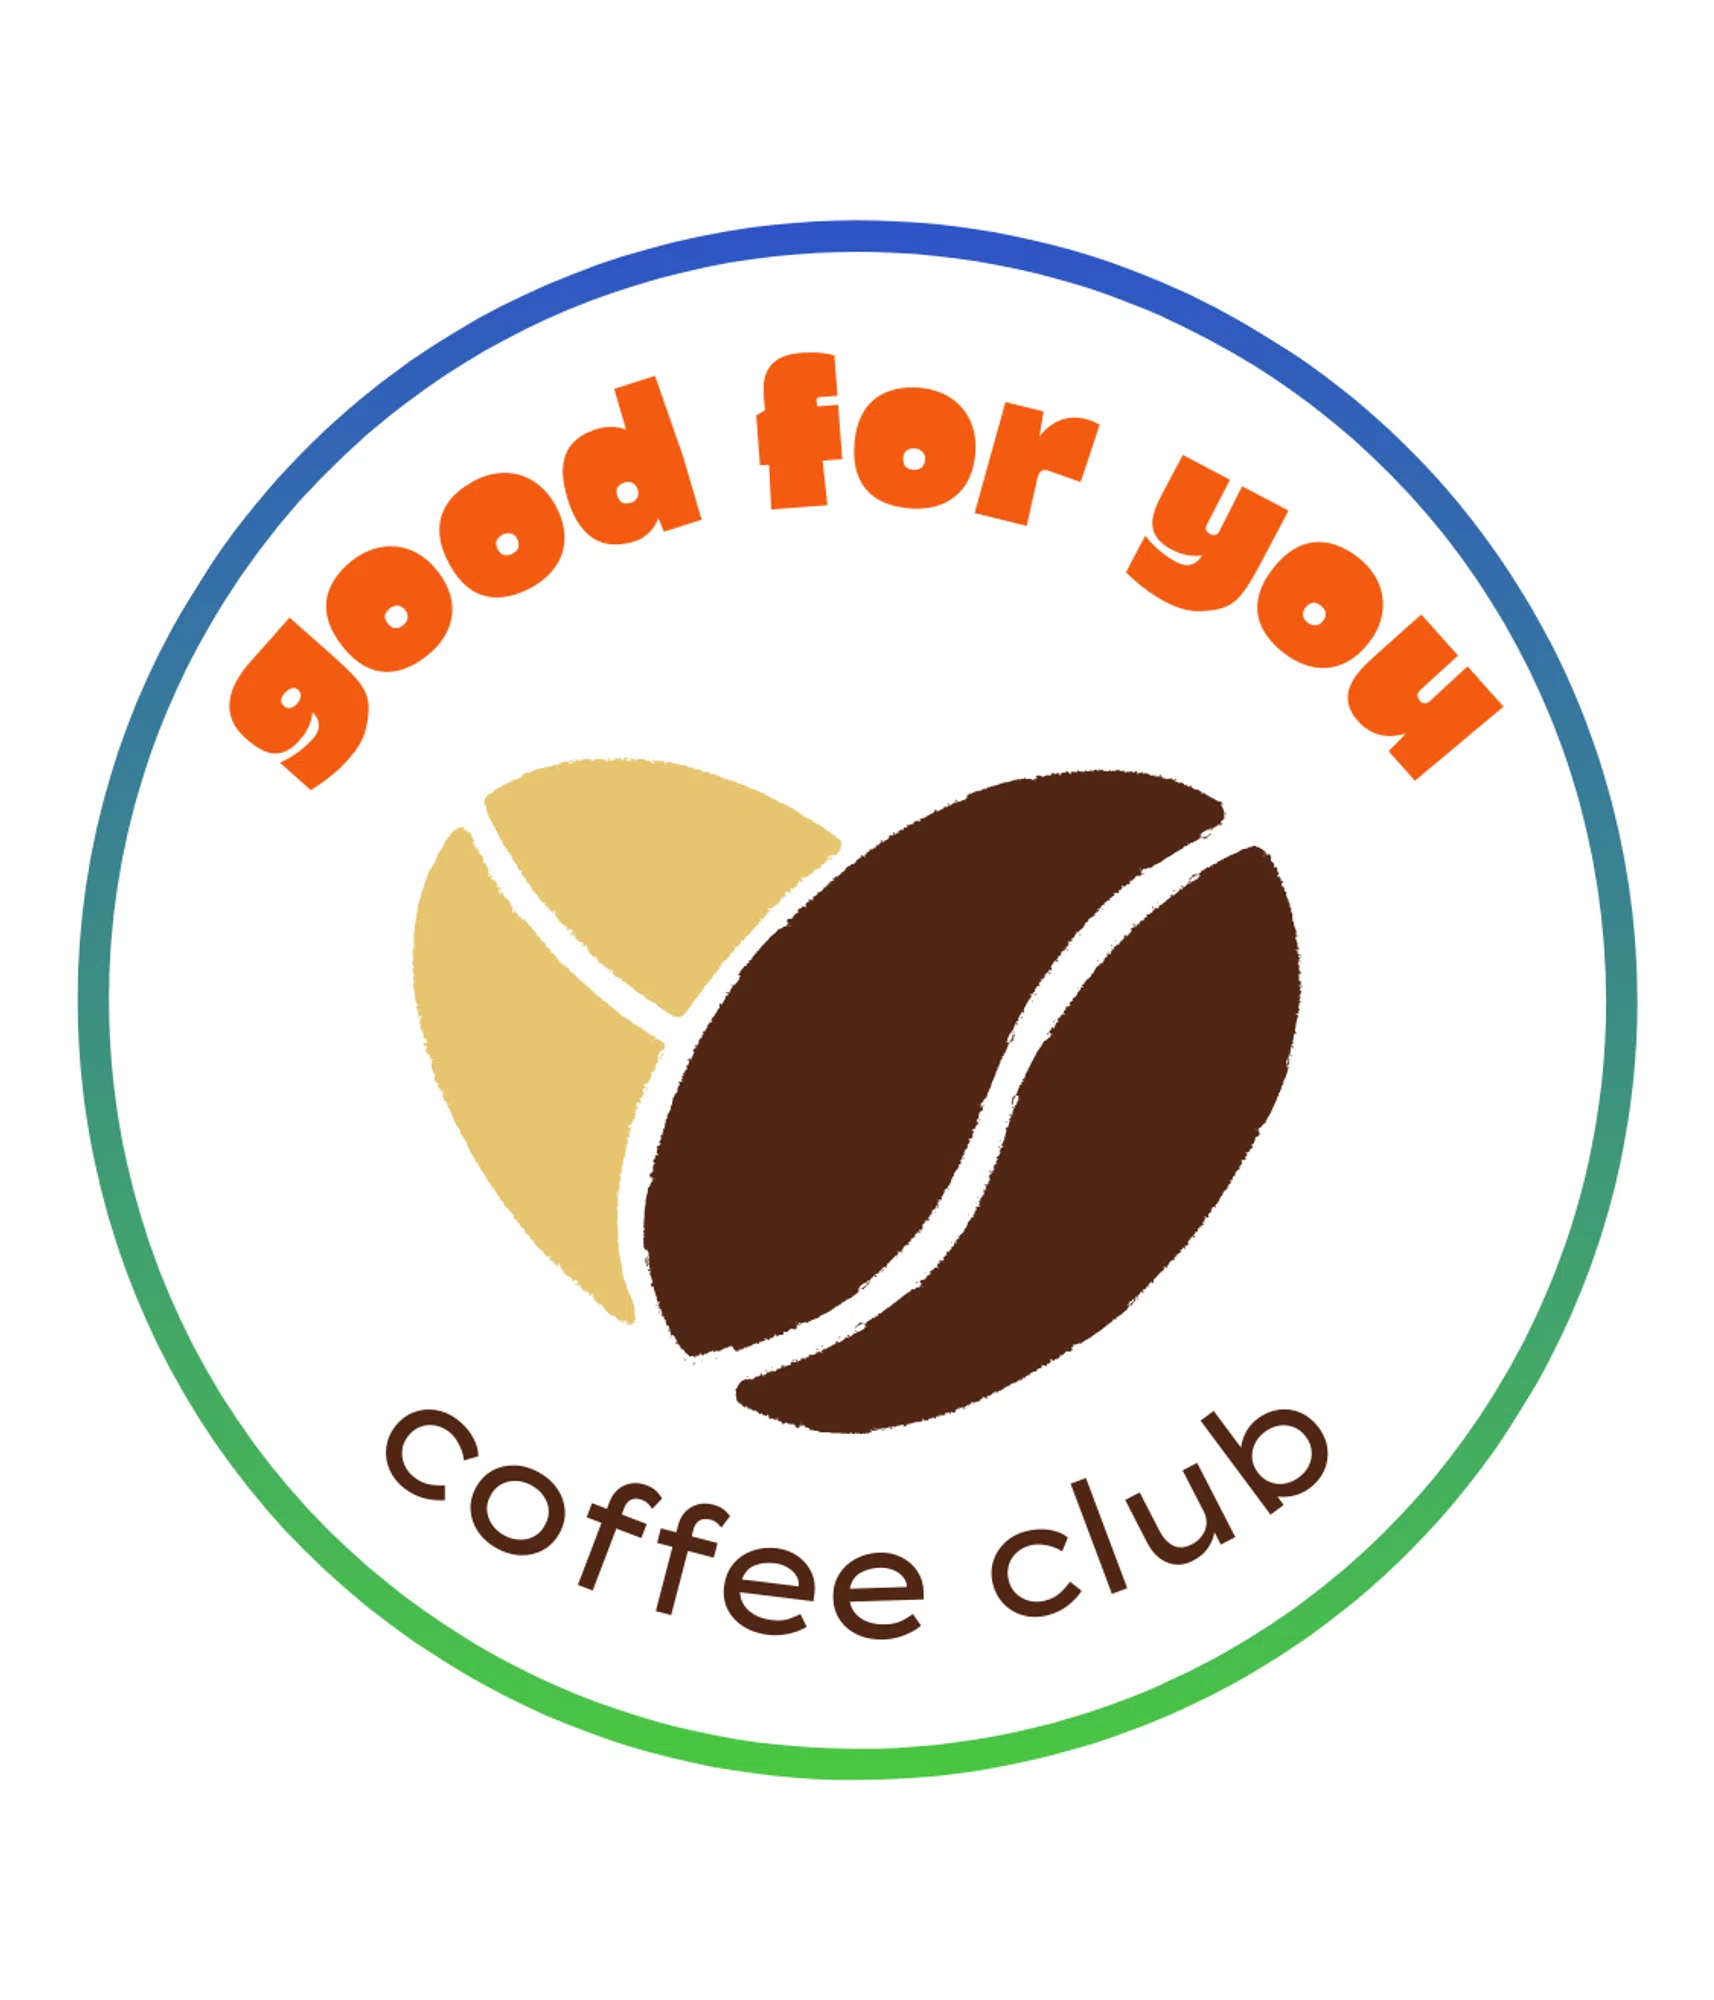 Good For You Coffee Club